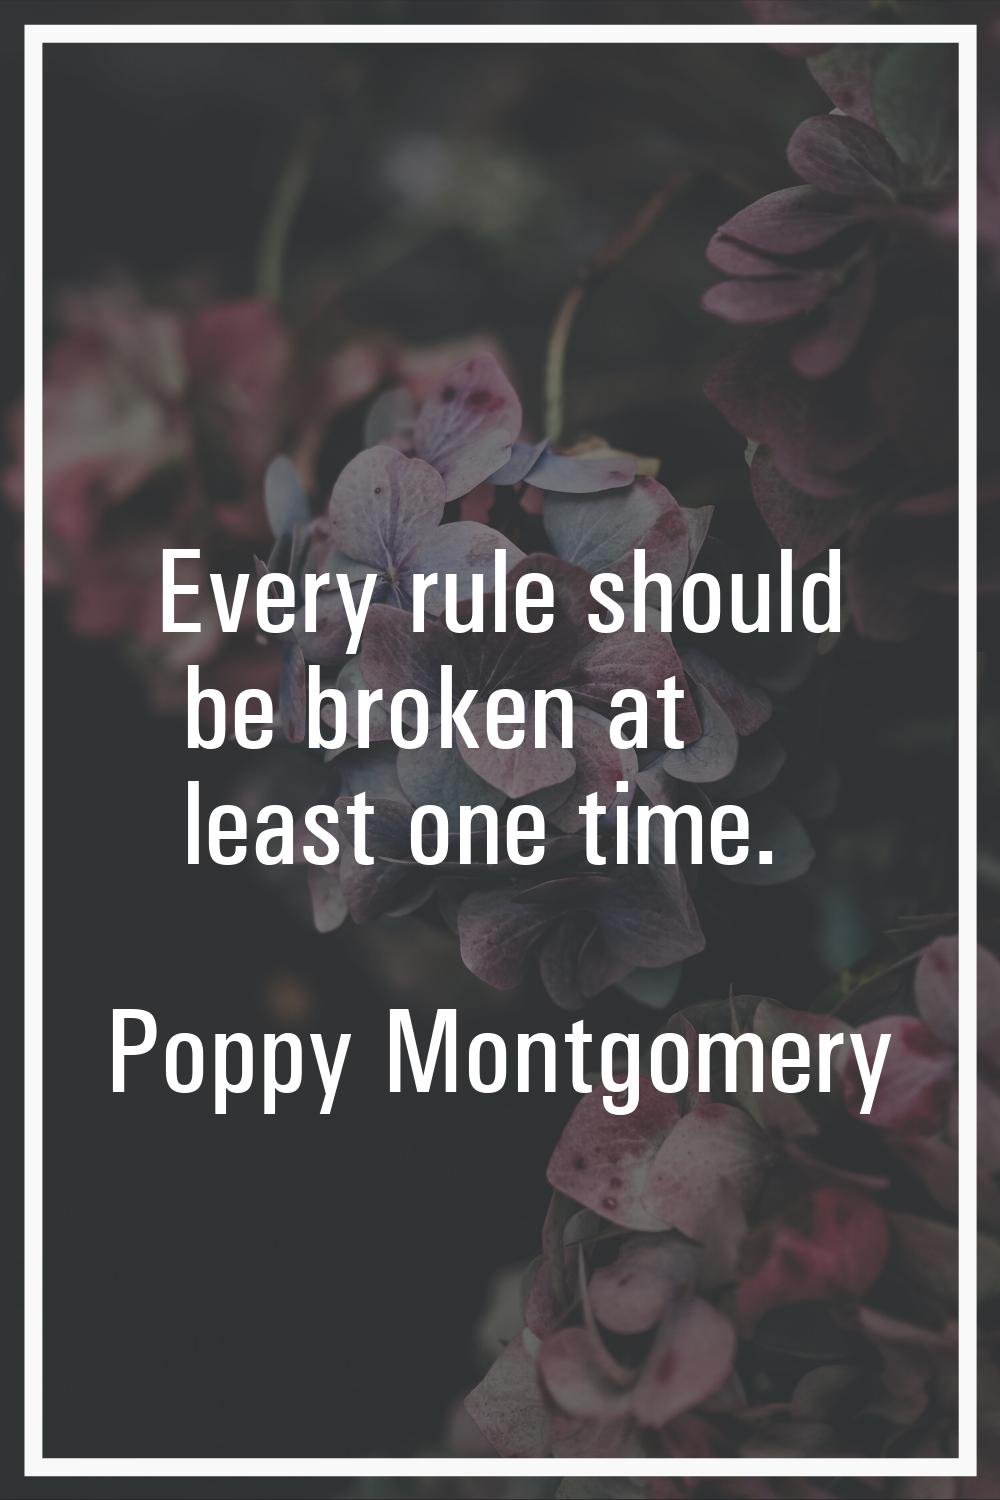 Every rule should be broken at least one time.